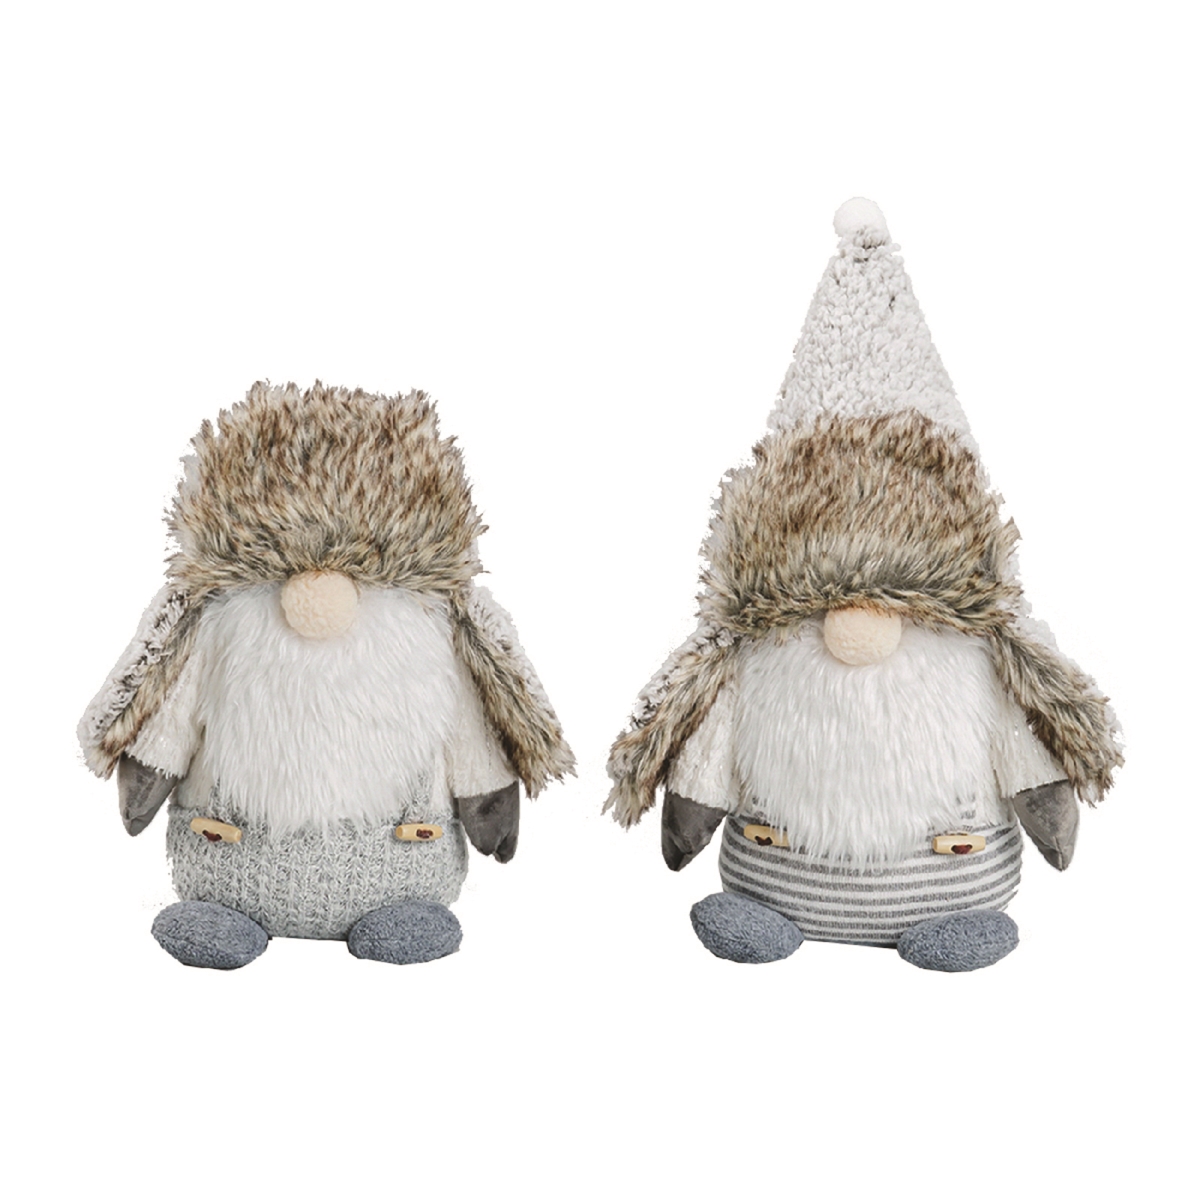 Picture of Santas Workshop 2001 12.5 in. Brothers Gnome - Set of 2